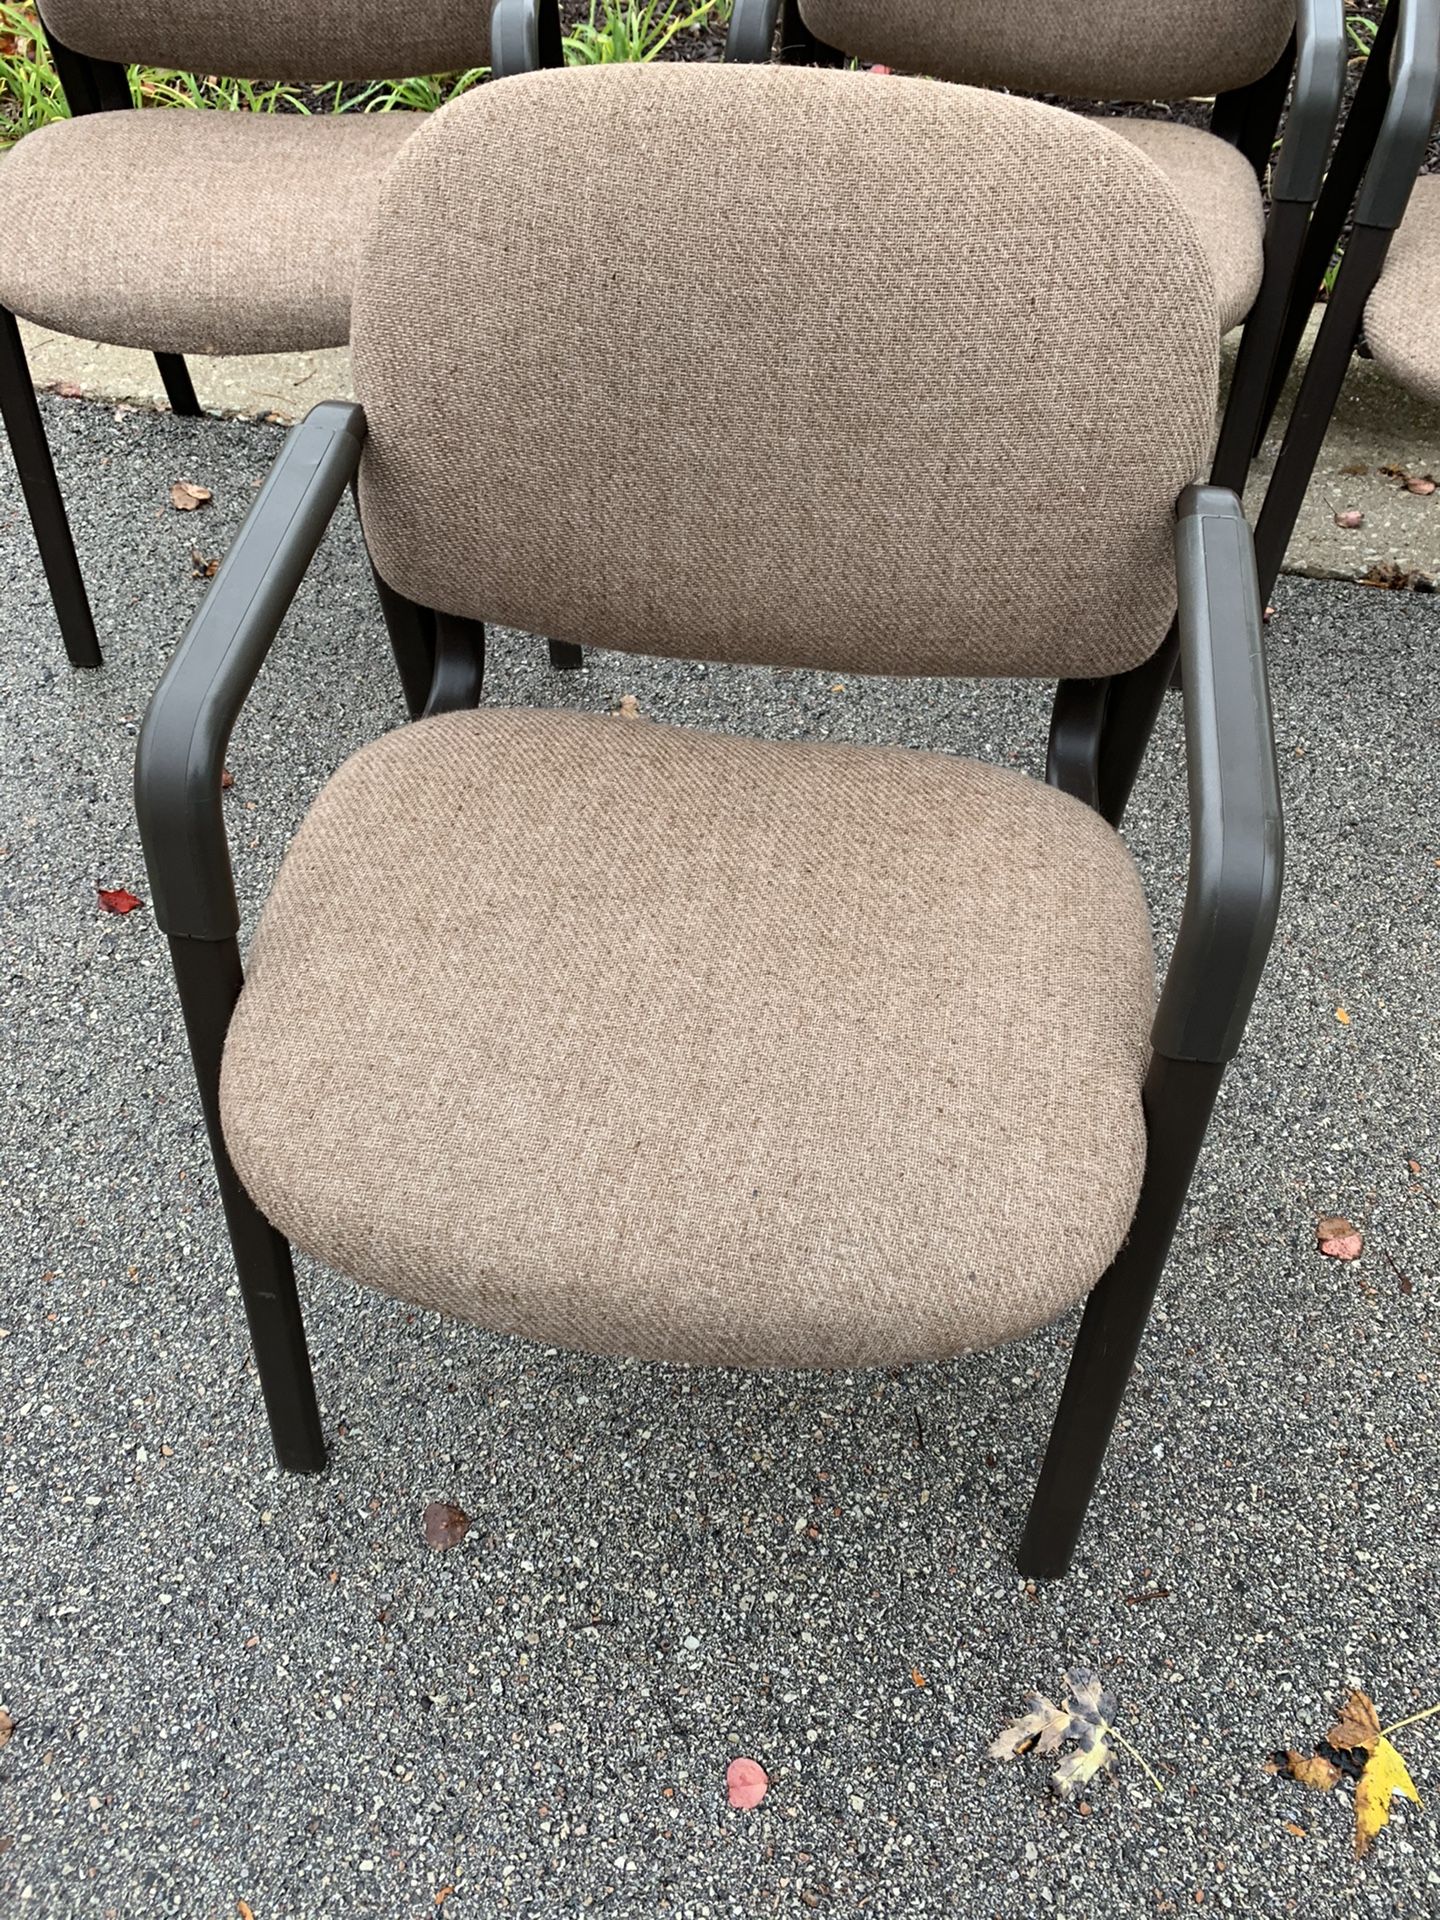 8 office chairs - free for pickup today